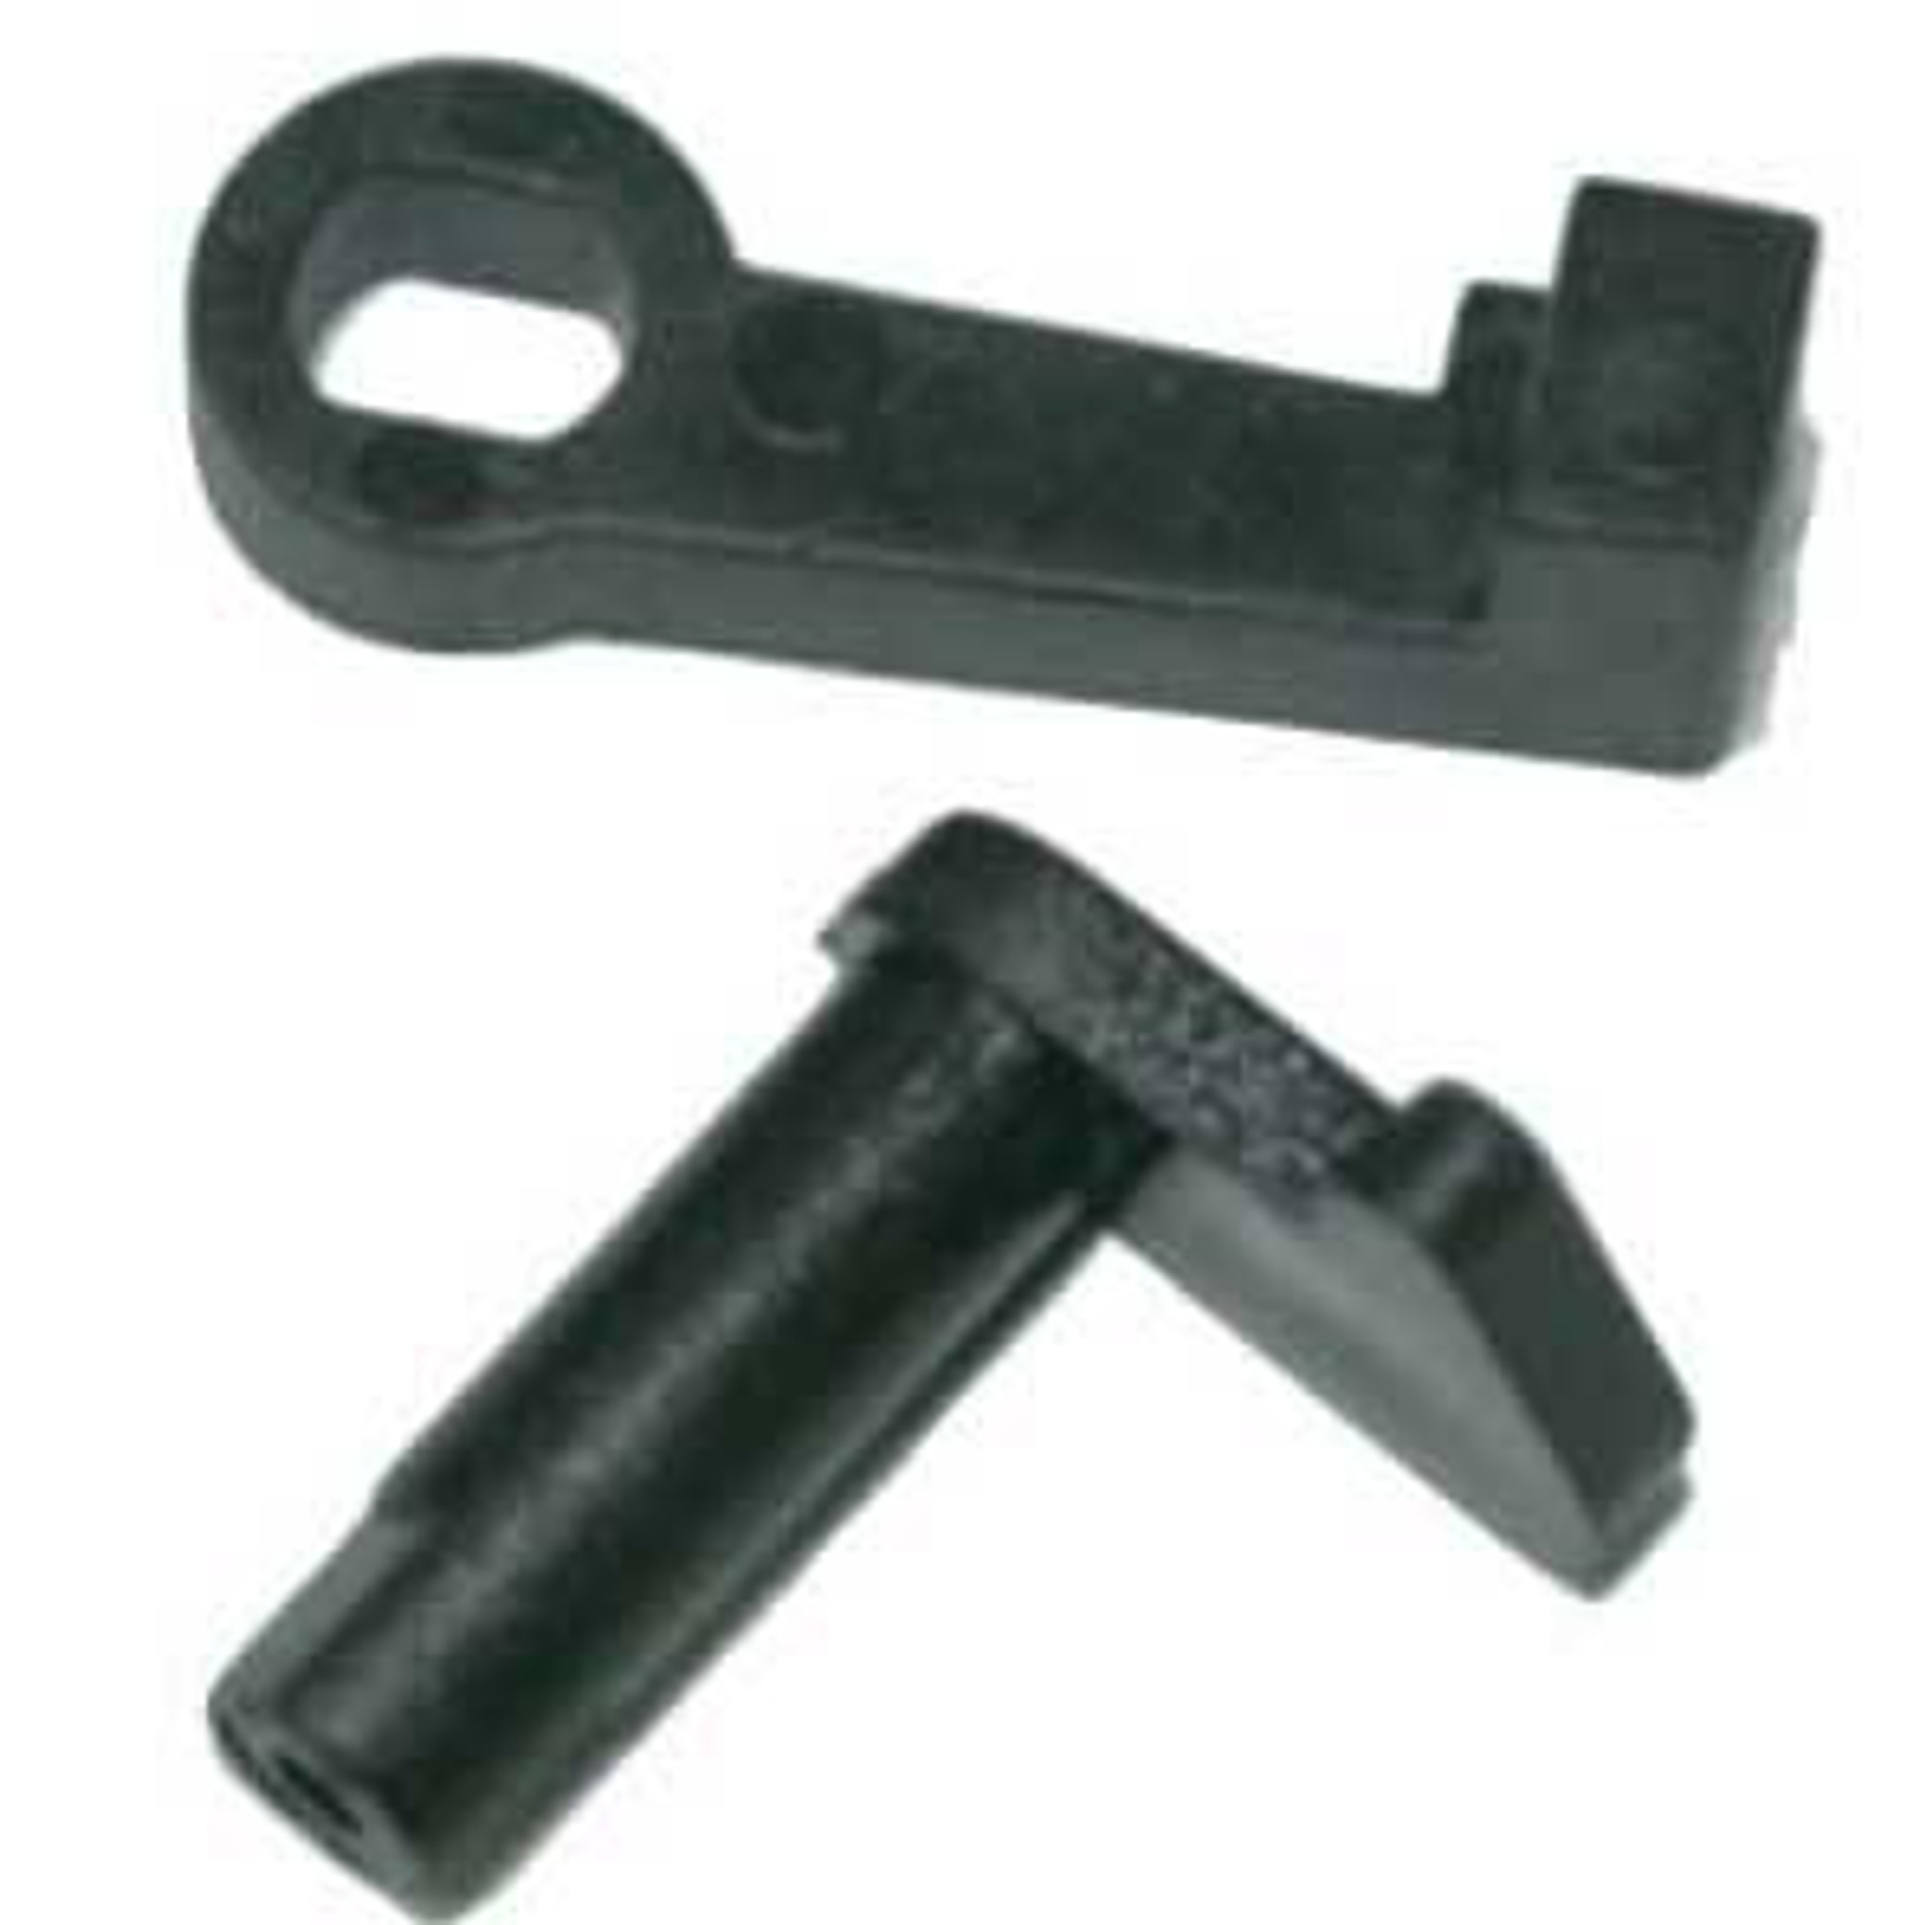 ICS Gearbox Safety Lever for ICS M4 / M16 / MP5 Series Airsoft AEG